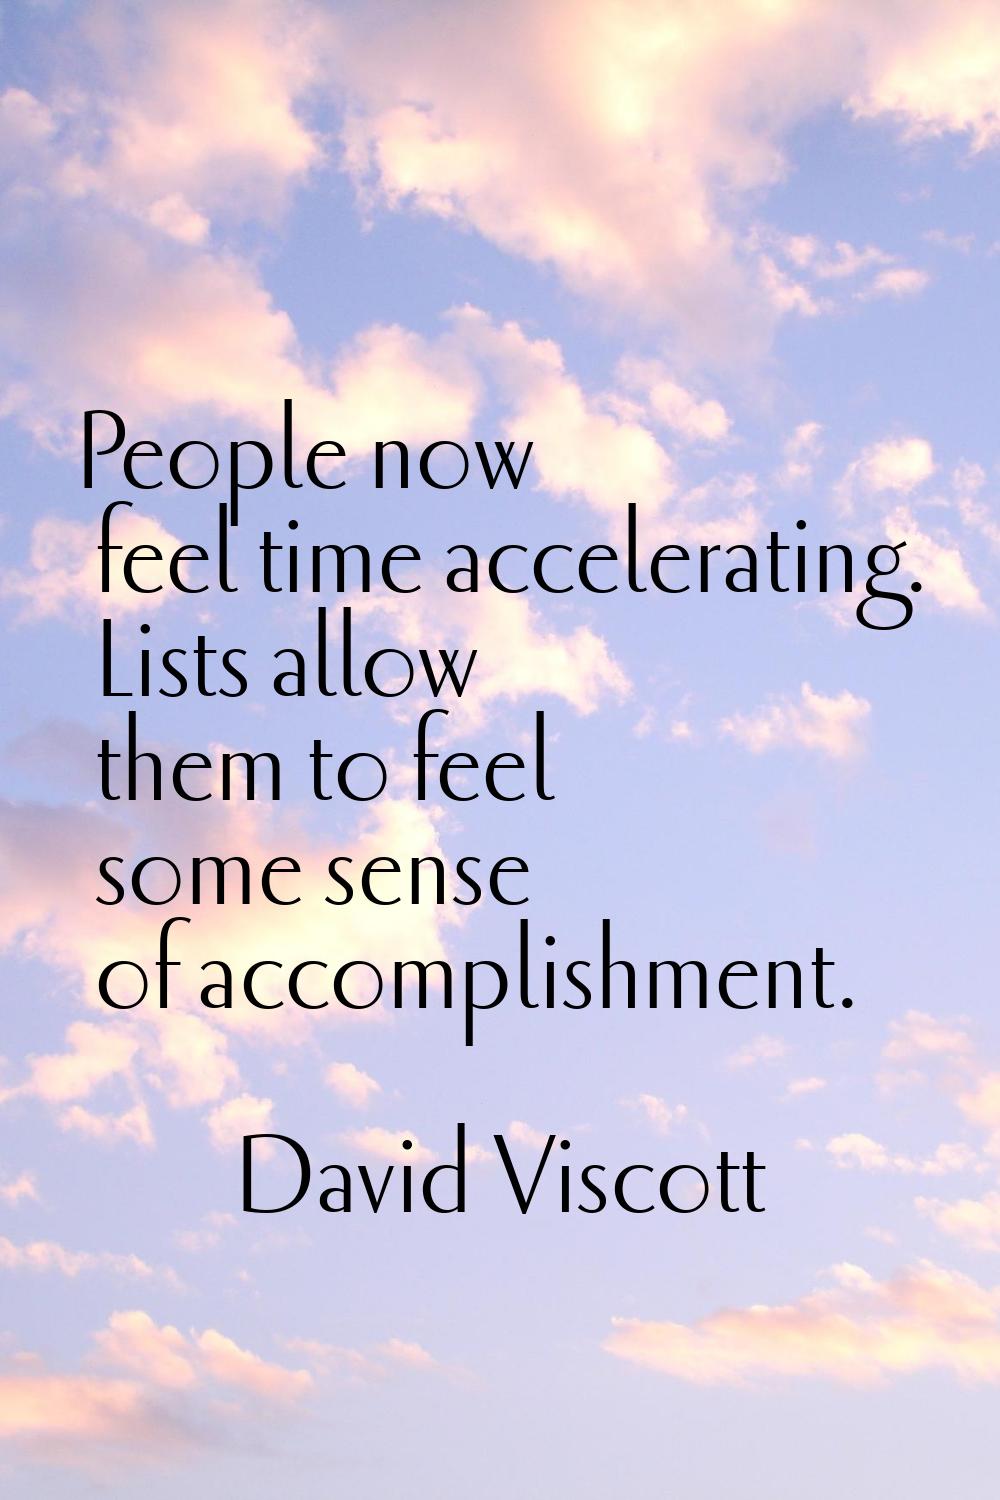 People now feel time accelerating. Lists allow them to feel some sense of accomplishment.